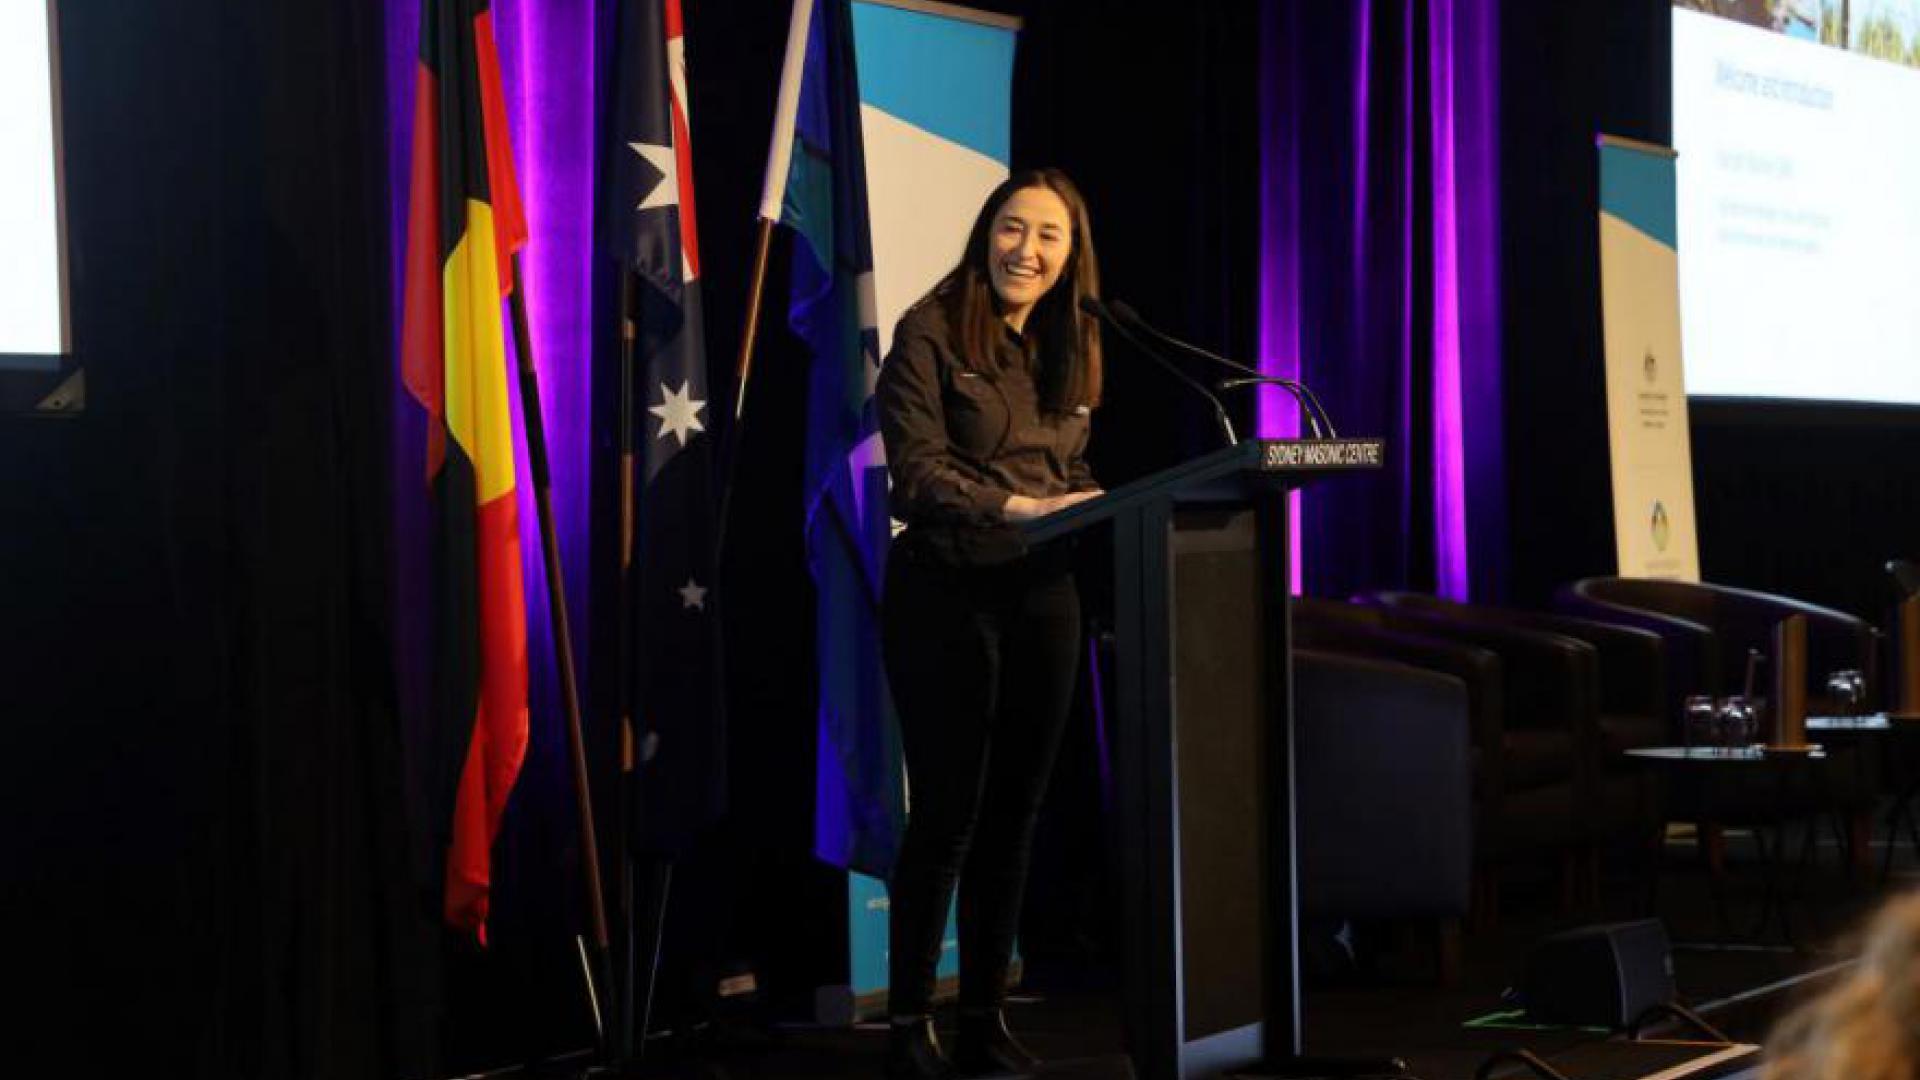 Hannah Wandel OAM, Acting Executive Manager Policy and Programs, National Emergency Management Agency, speaks at the July 2022 From Risk to Resilience Summit held in Sydney in partnership with the Australian Institute of Disaster Resilience. 